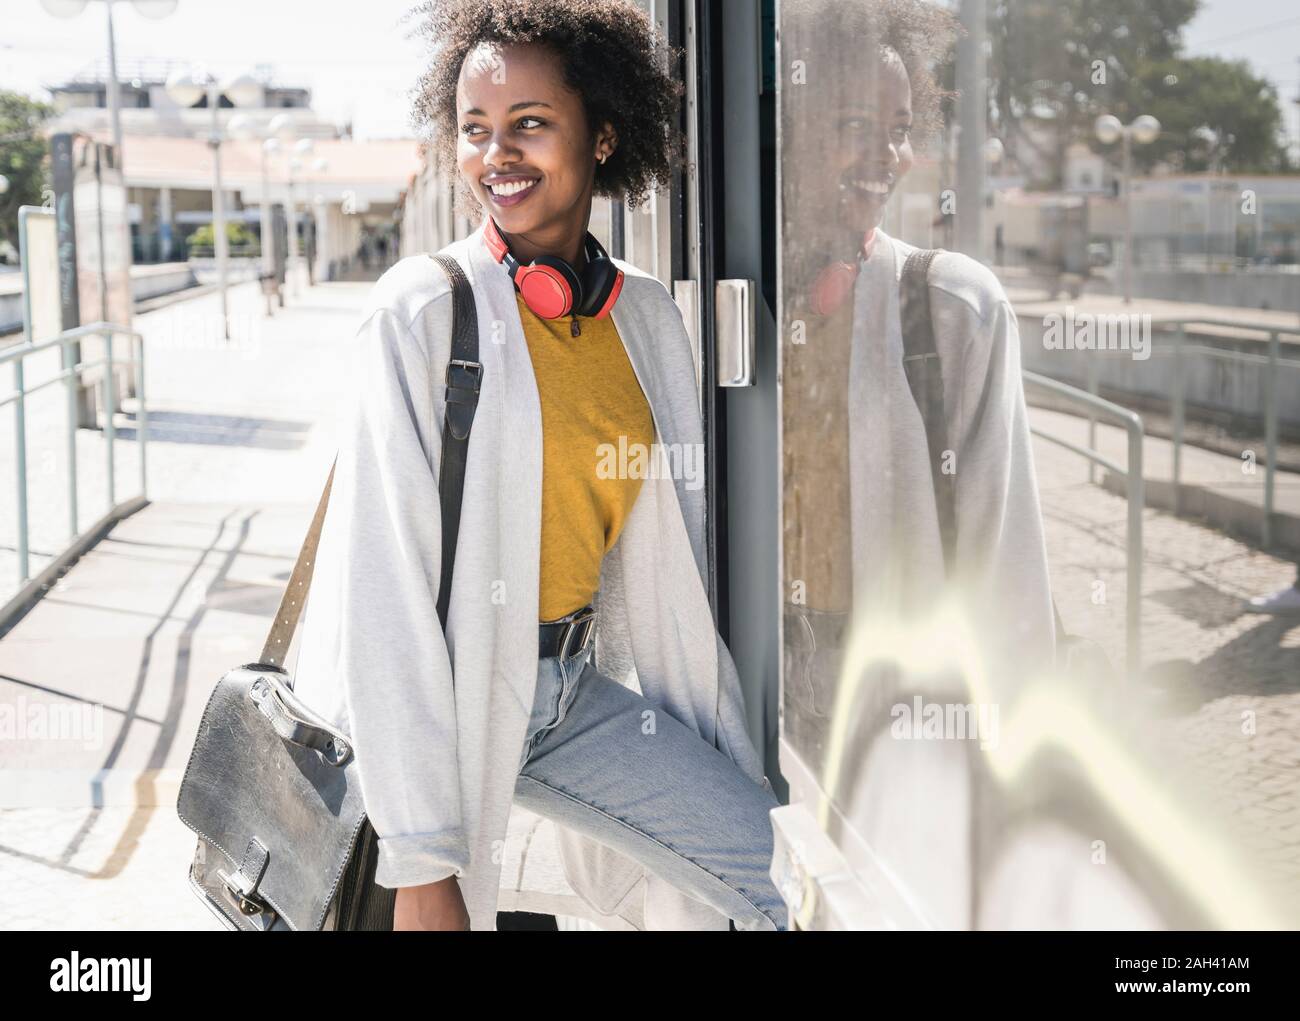 Smiling young woman entering a train Stock Photo